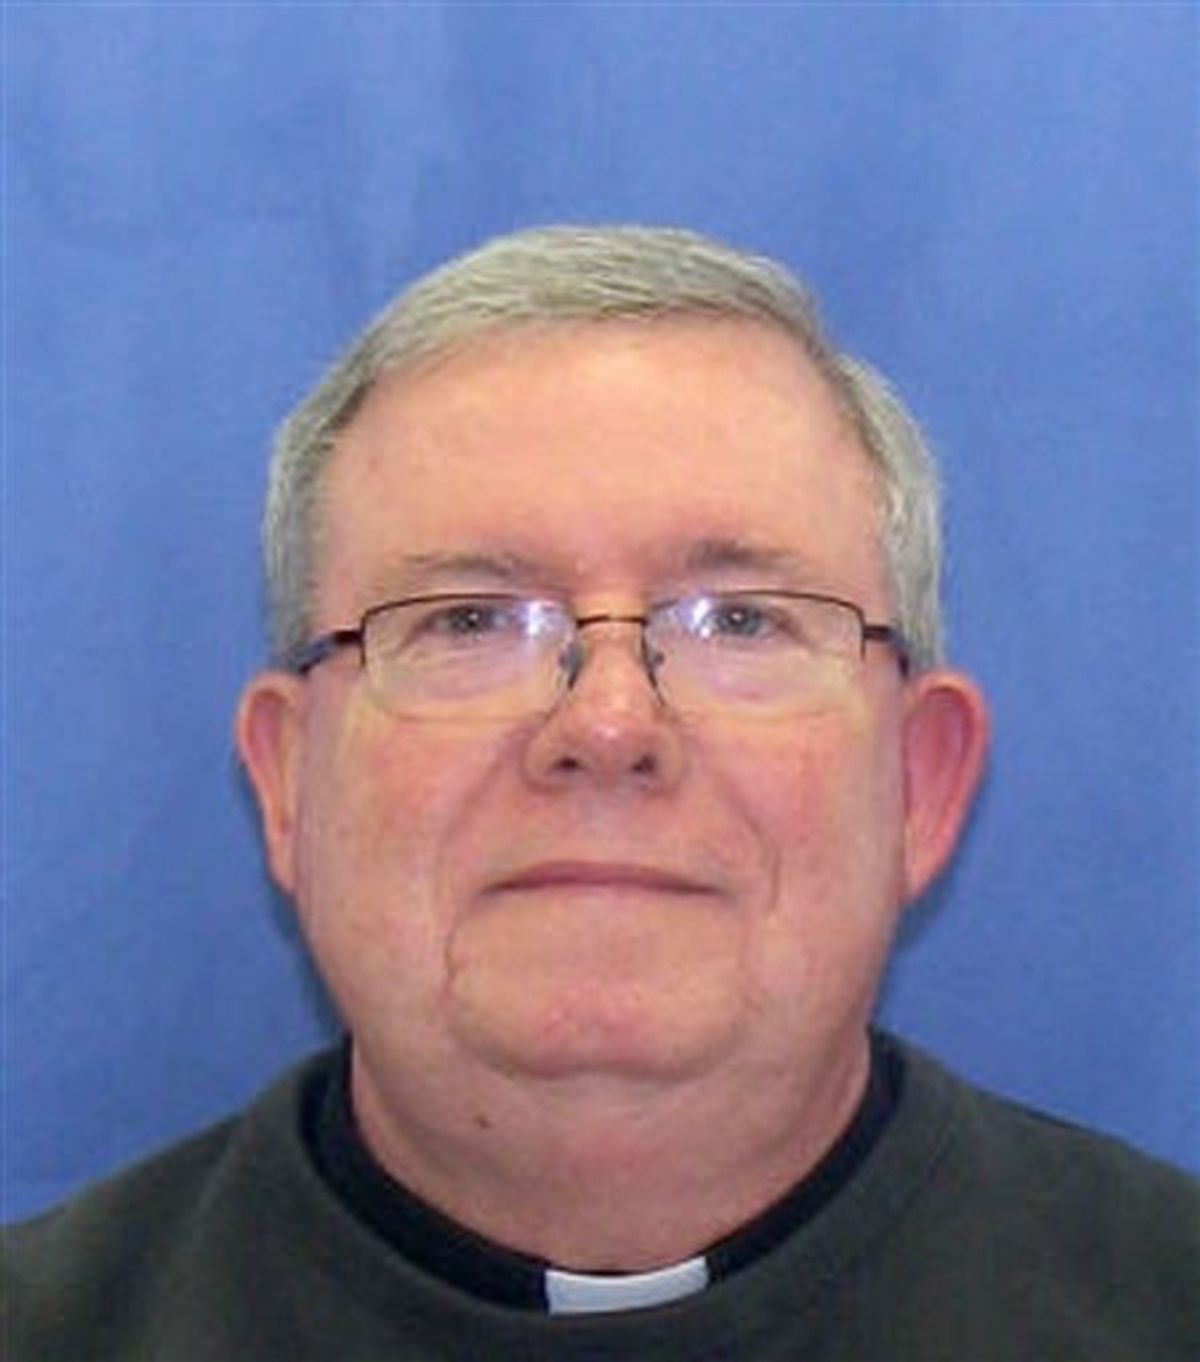 In this undated photo released by the Philadelphia District Attorney's office, Monsignor William Lynn is shown.  Lynn, the former secretary of clergy under Cardinal Anthony Bevilacqua, is charged with felony endangerment according to a grand jury report released Thursday Feb, 10, 2011.   Prosecutors say Lynn transferred abusive priests to new parishes with schools and youth groups without warning parish officials. (AP Photo/Courtesy of the Philadelphia District Attorney's Office) (AP)